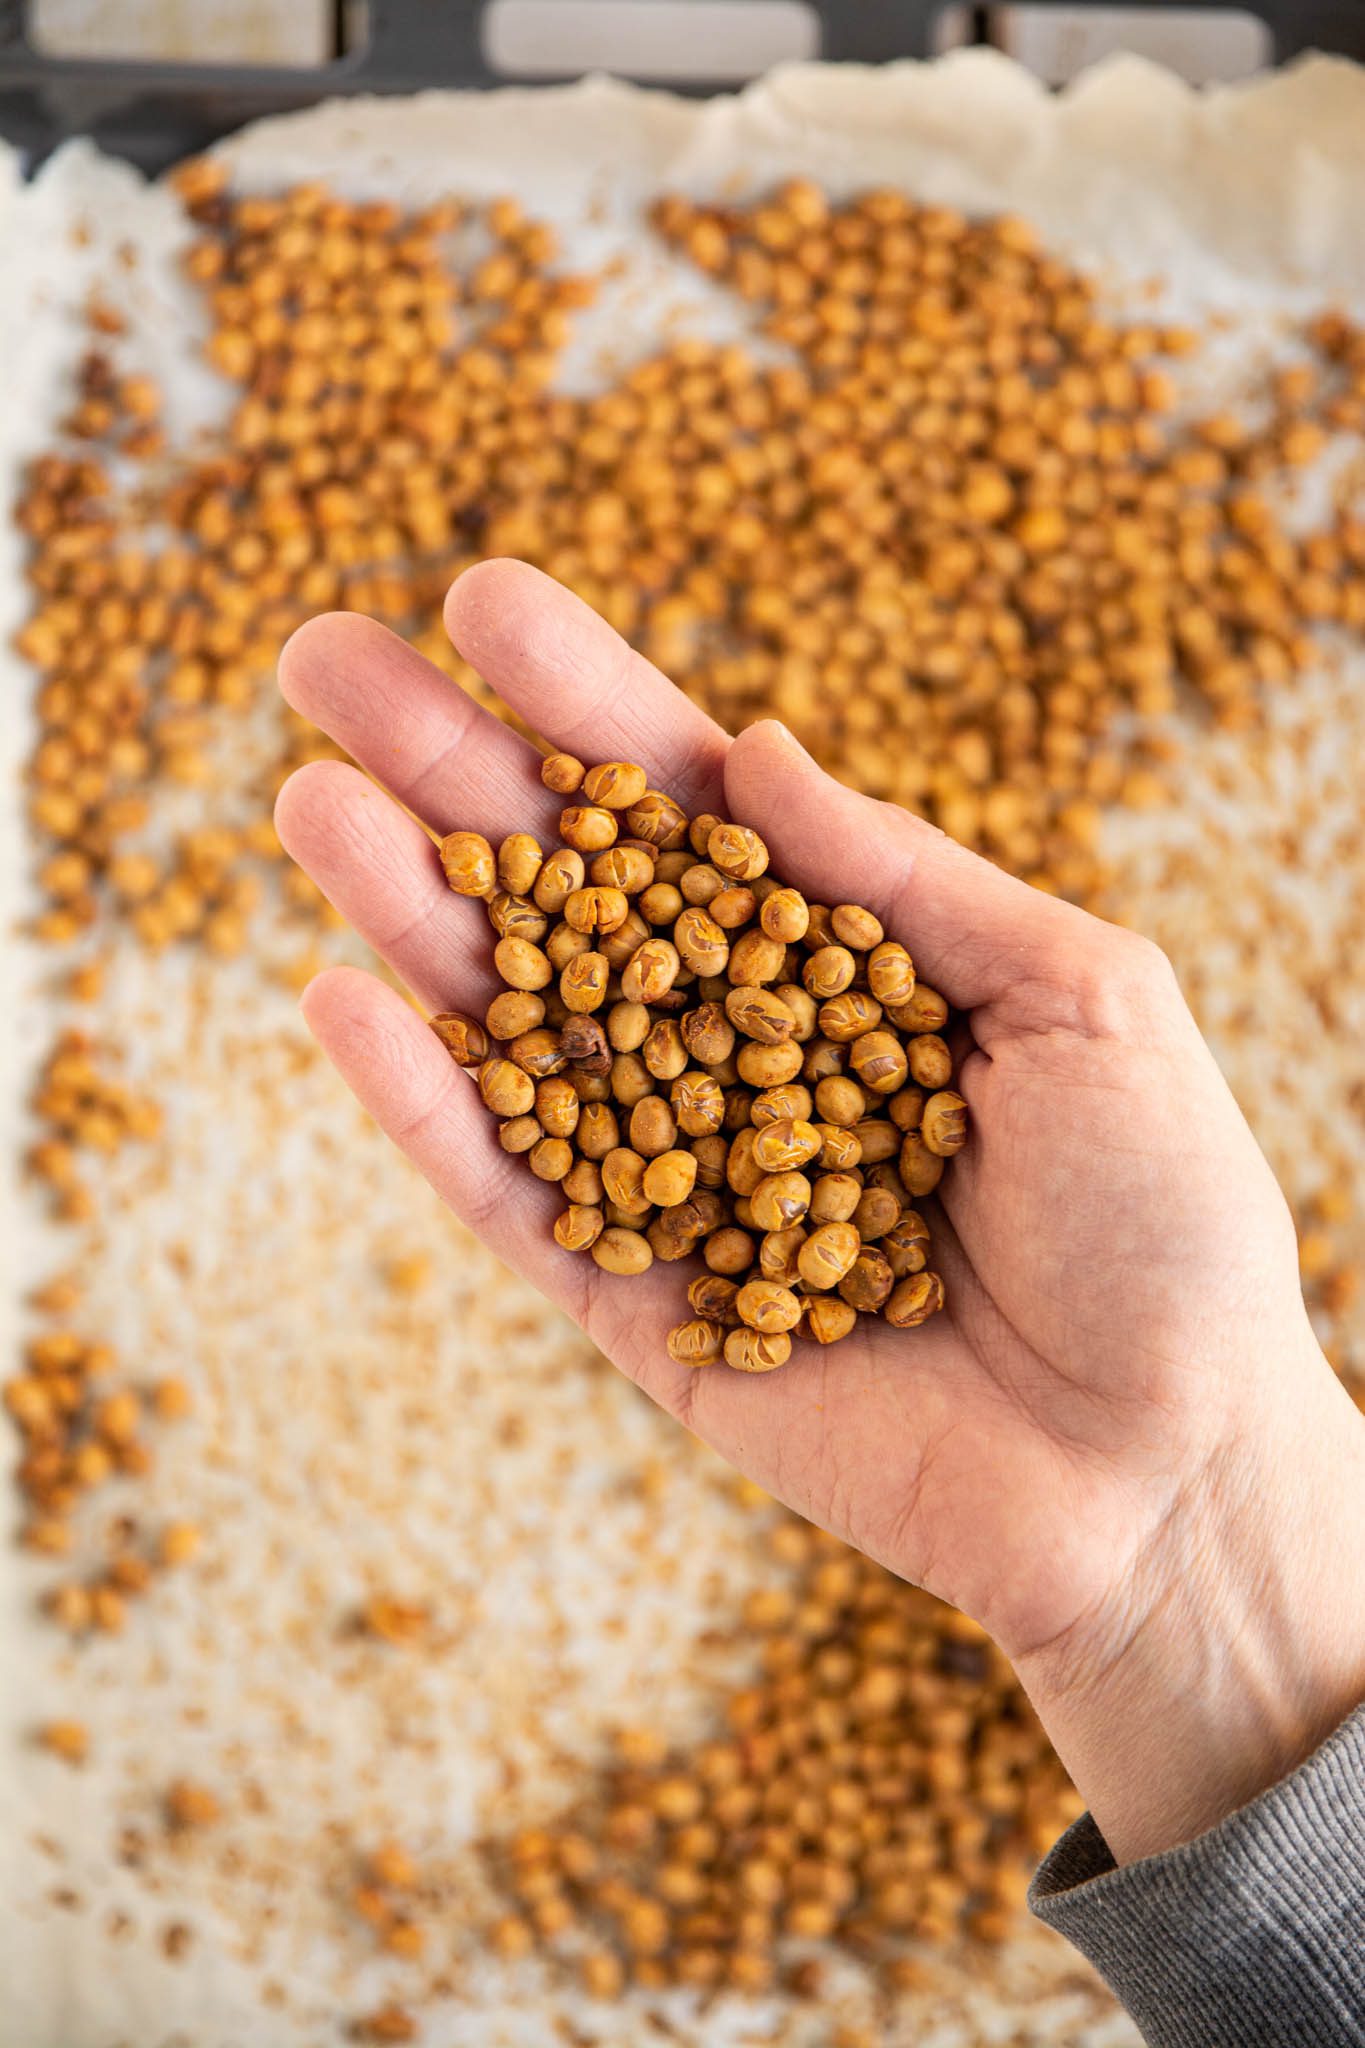 Learn how to make dry roasted soybeans in the oven without oil for a tasty low glycemic healthy snack.